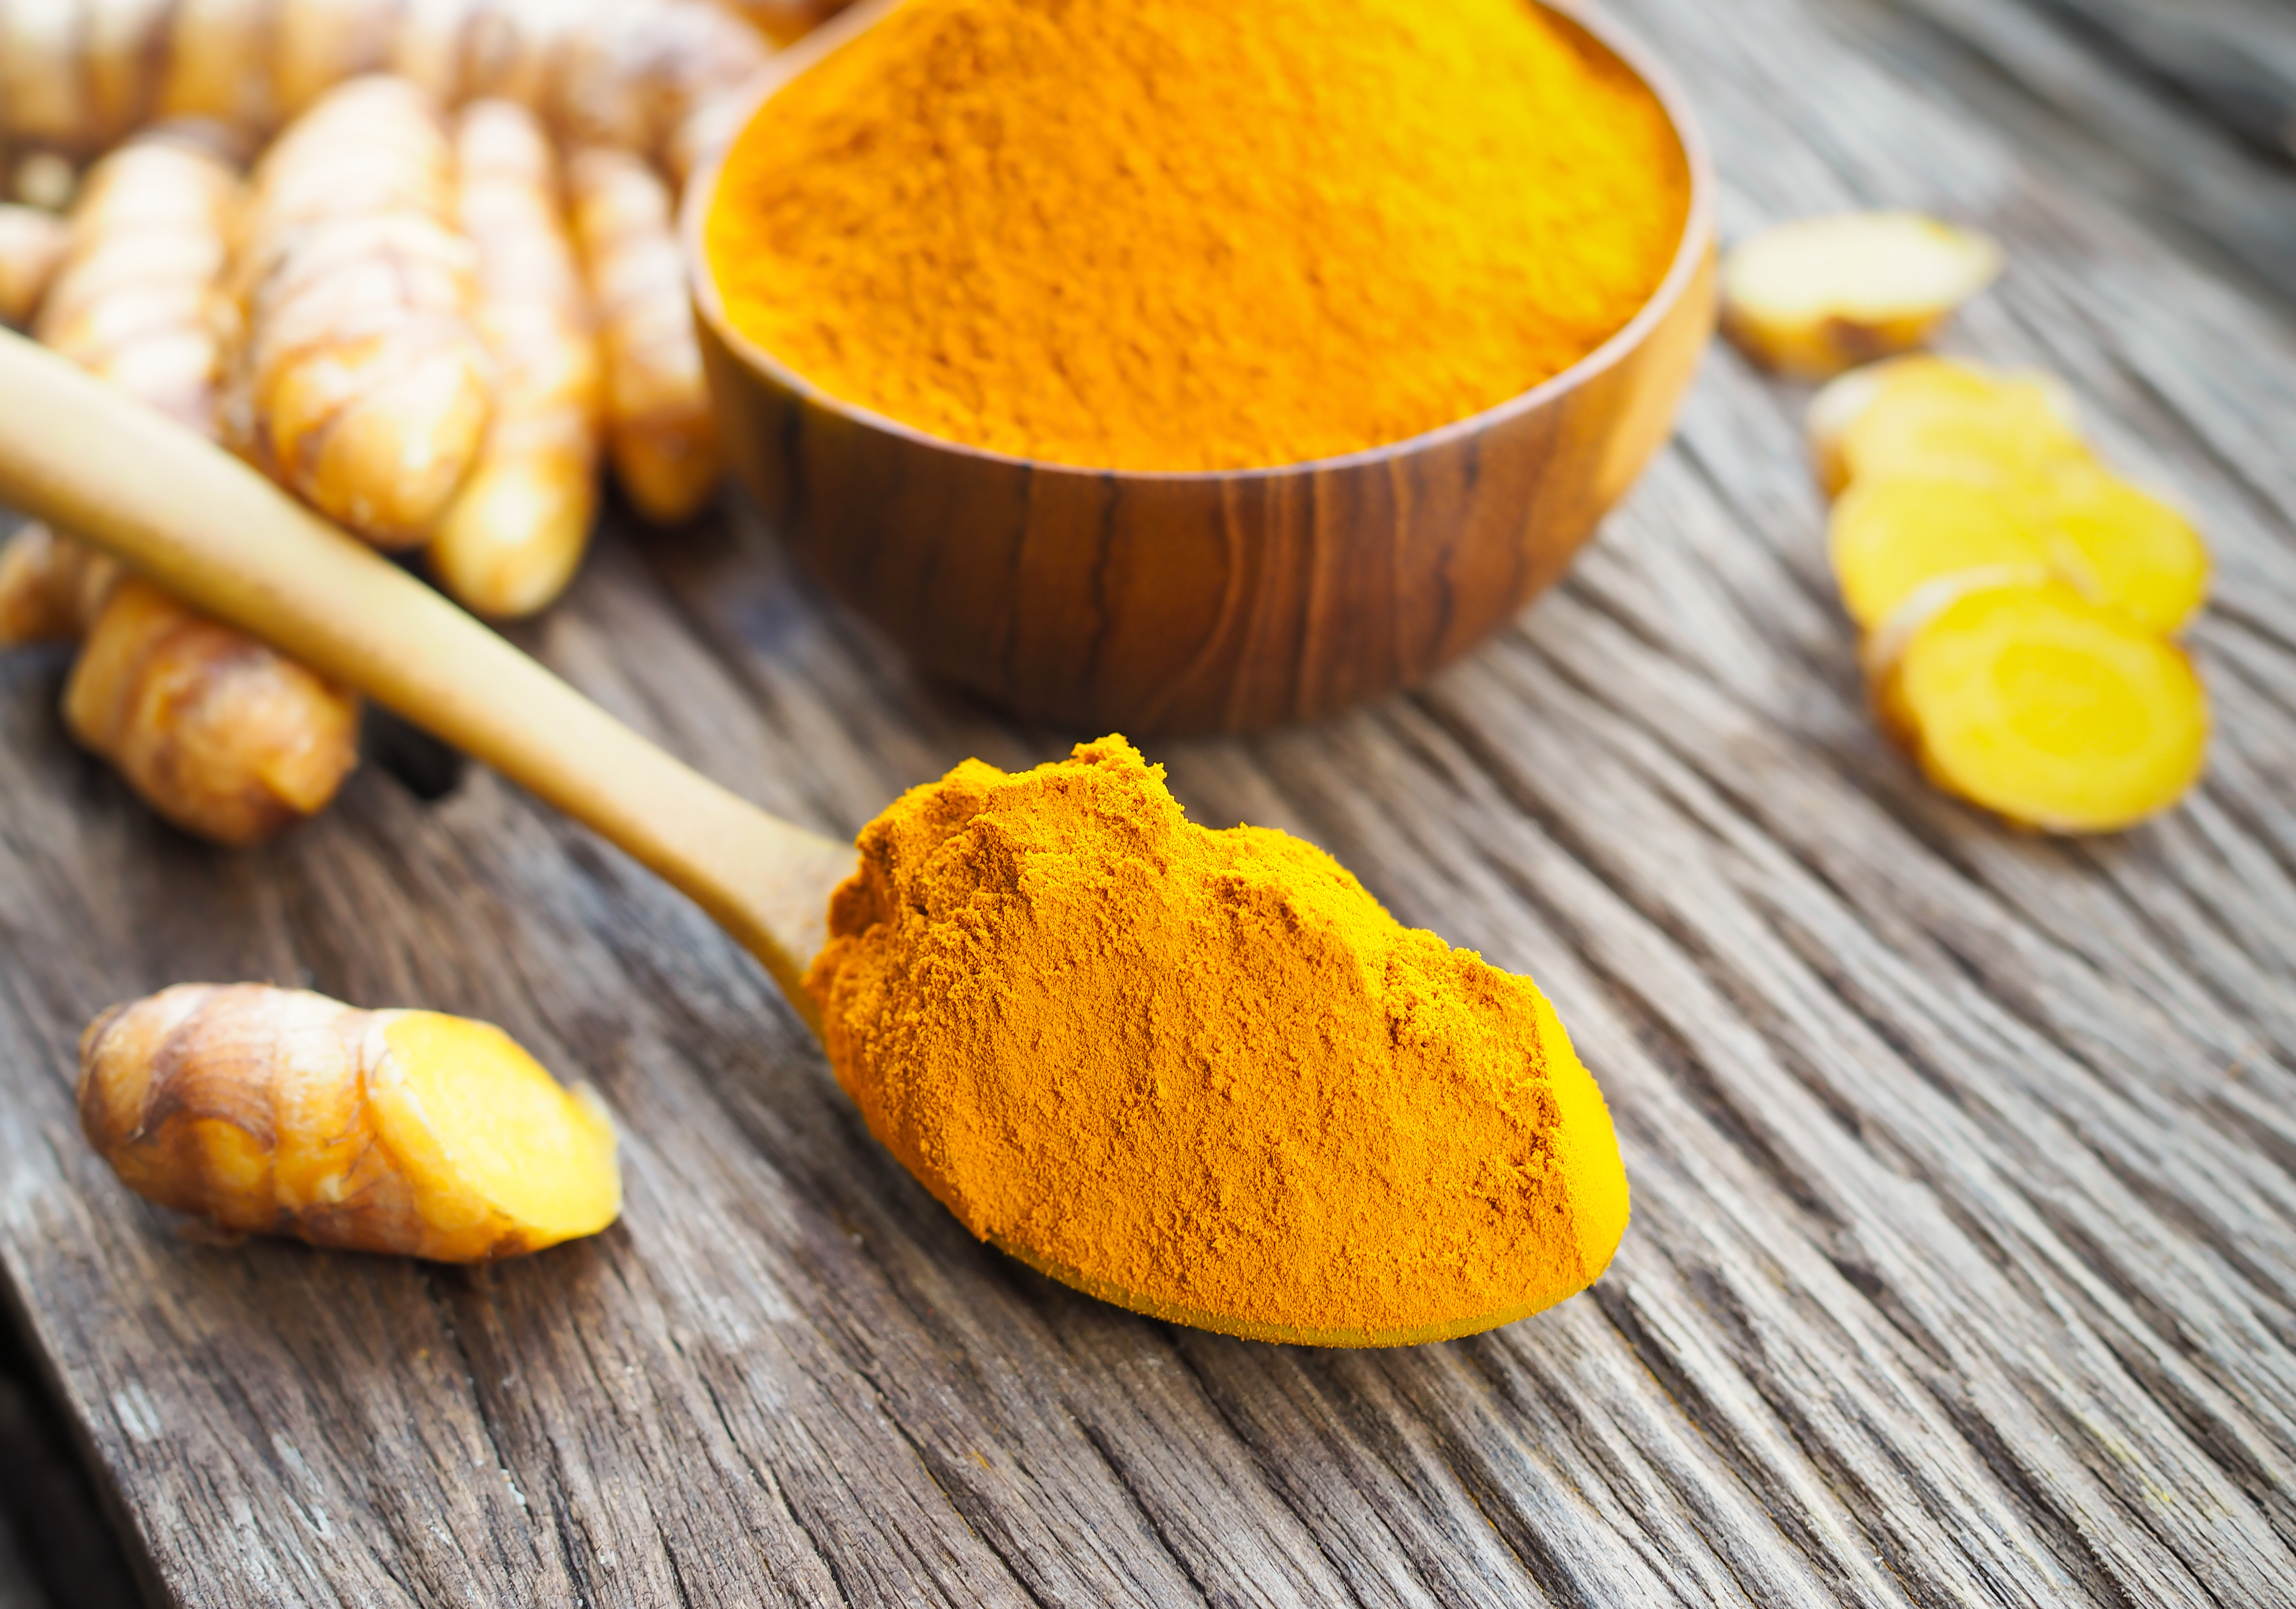 Turmeric for Weight Loss and Joint Pain